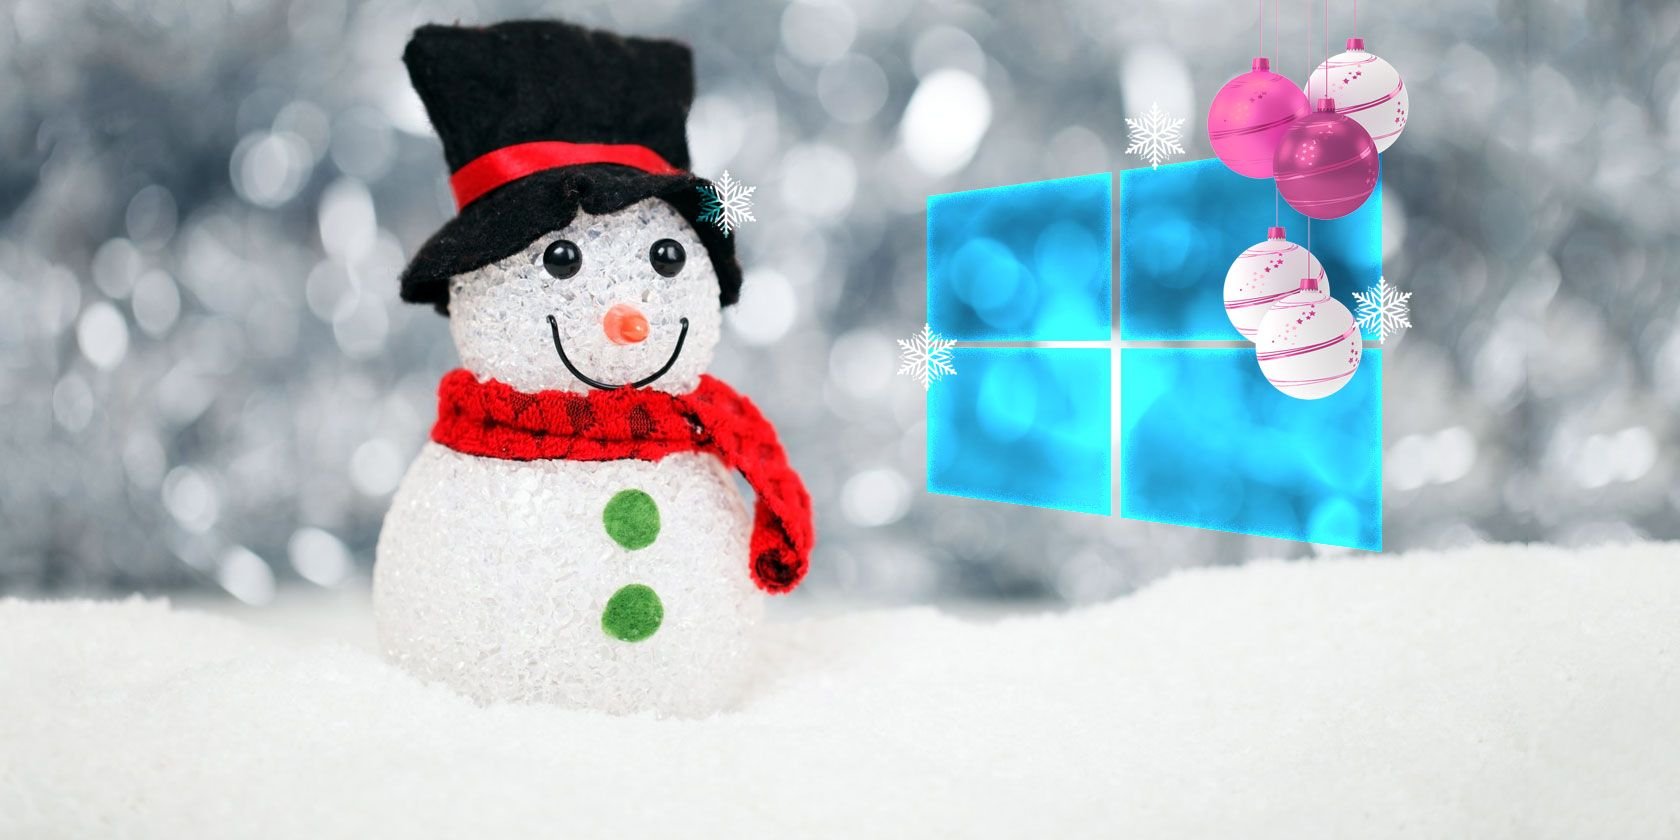 How to Add a Christmas Theme to Windows 10 and 11